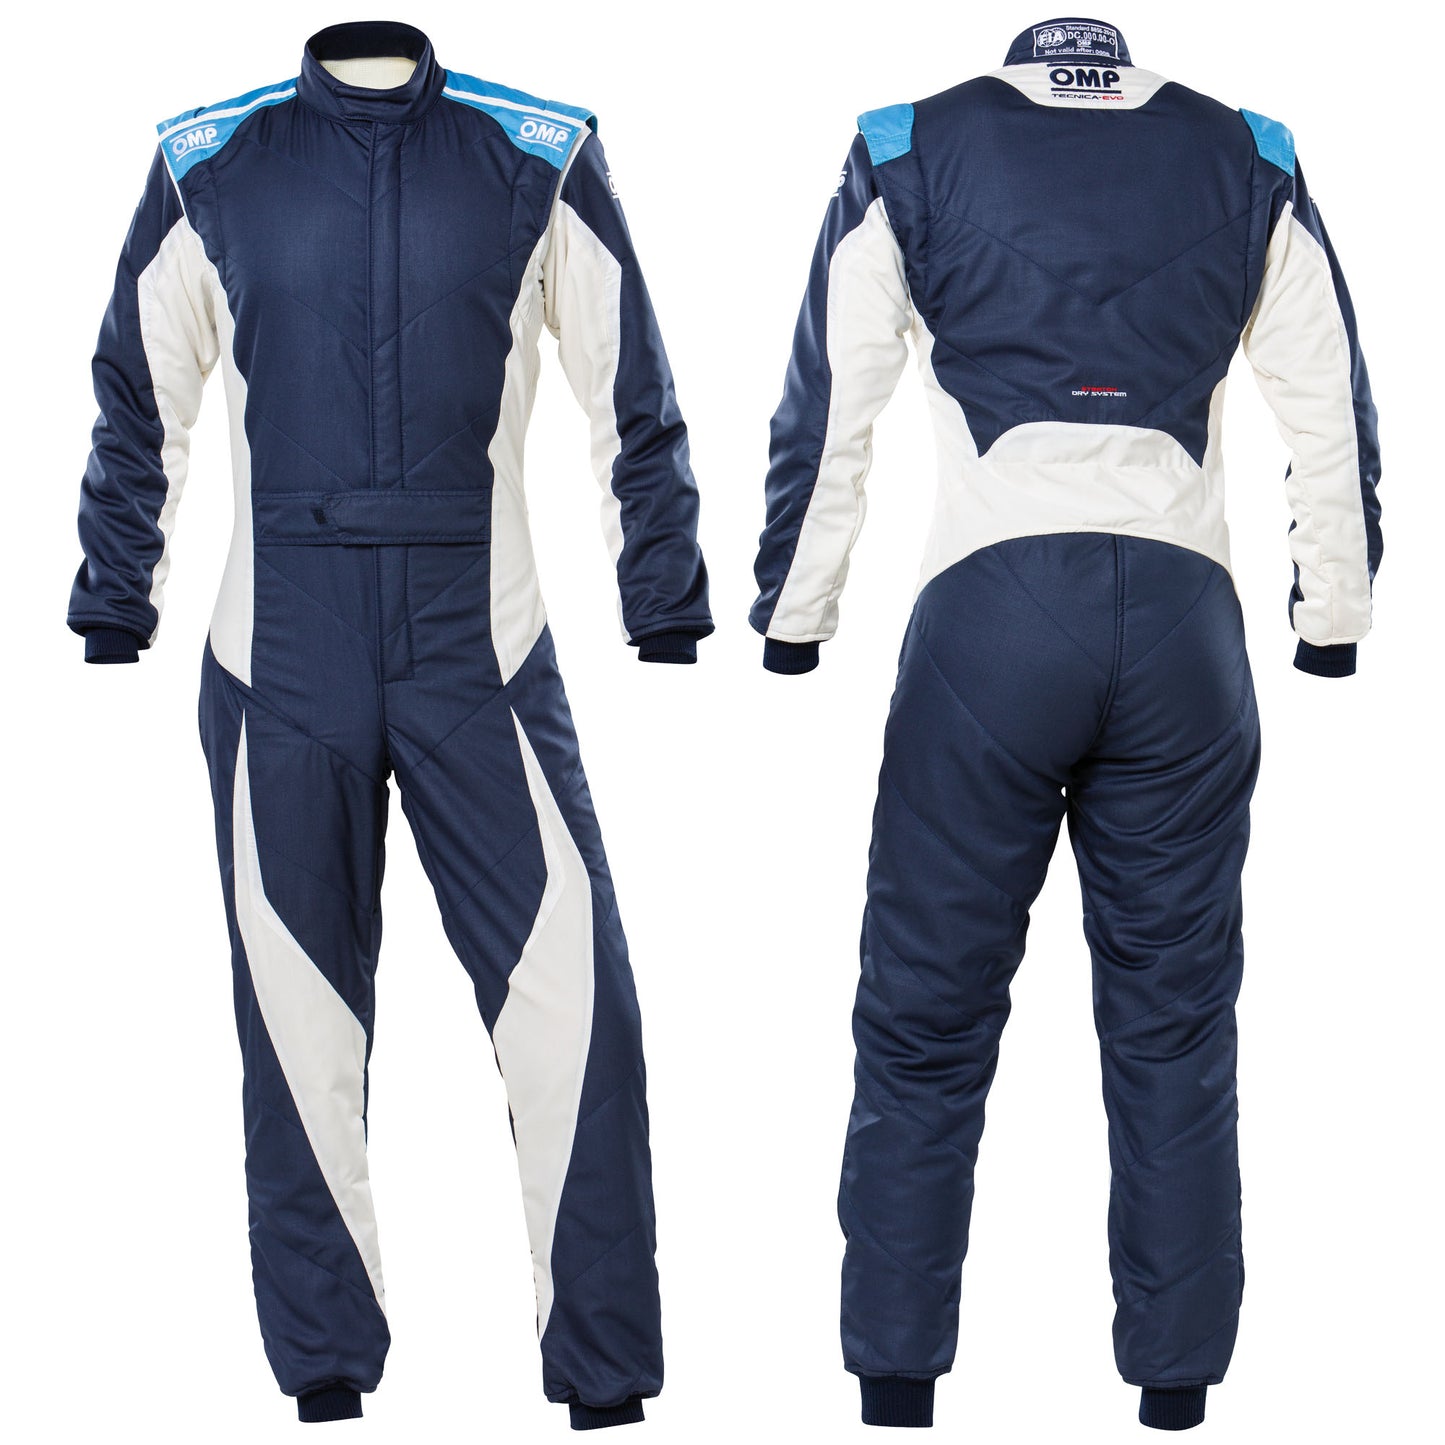 OMP Tecnica Evo Racing Driver Suit Latest Updated Design FIA 8856-2018 Approved